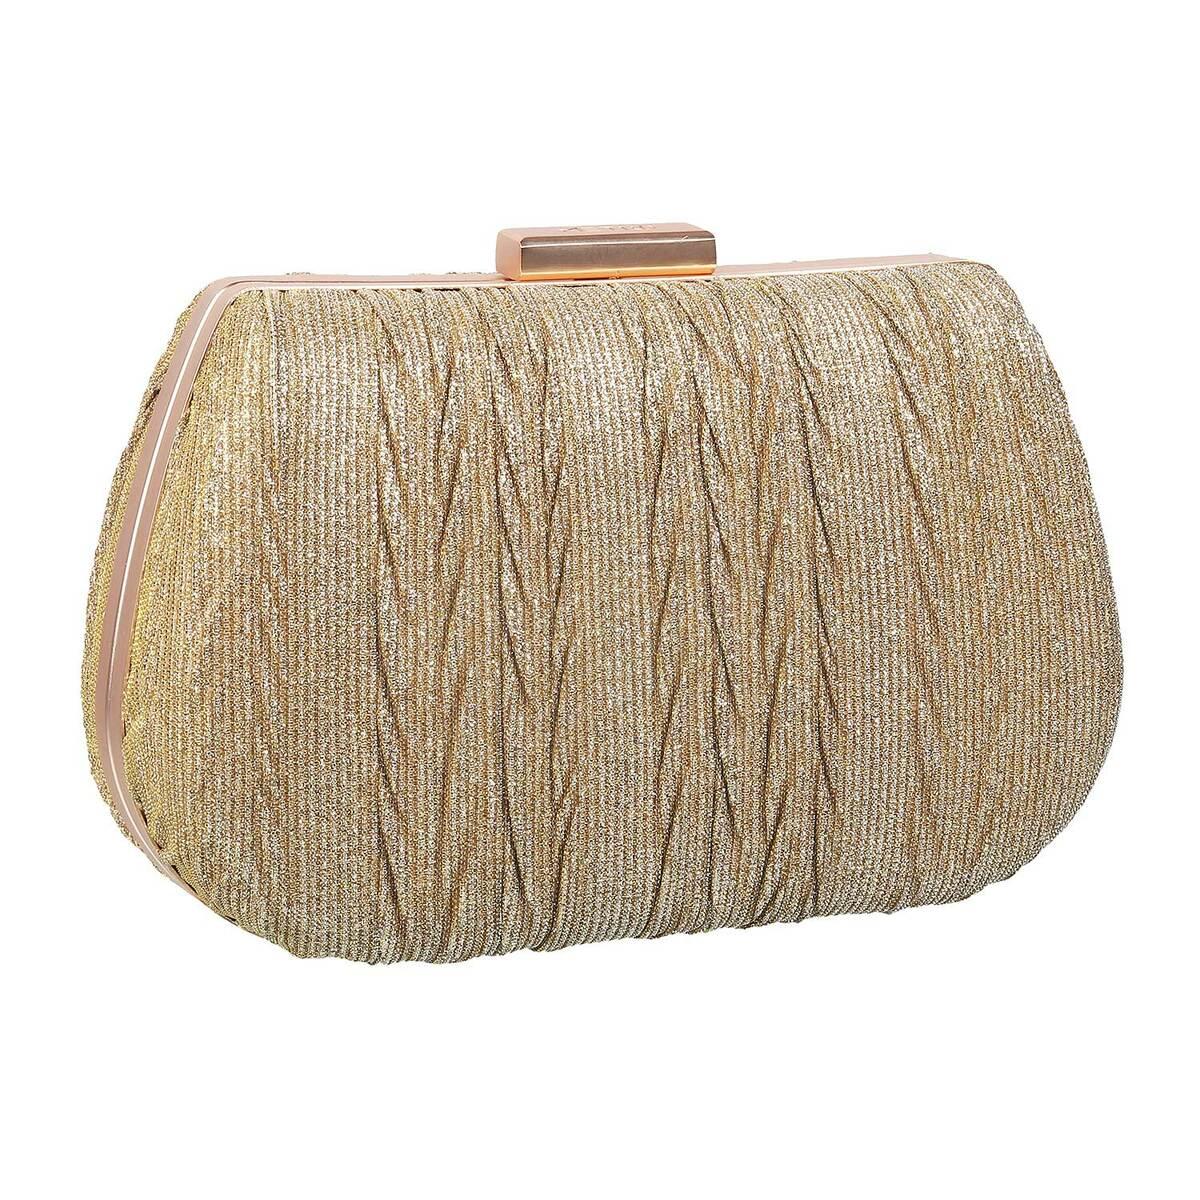 Champagne gold shoes and clutch purse for ladies - Aniemarket | Flutterwave  Store